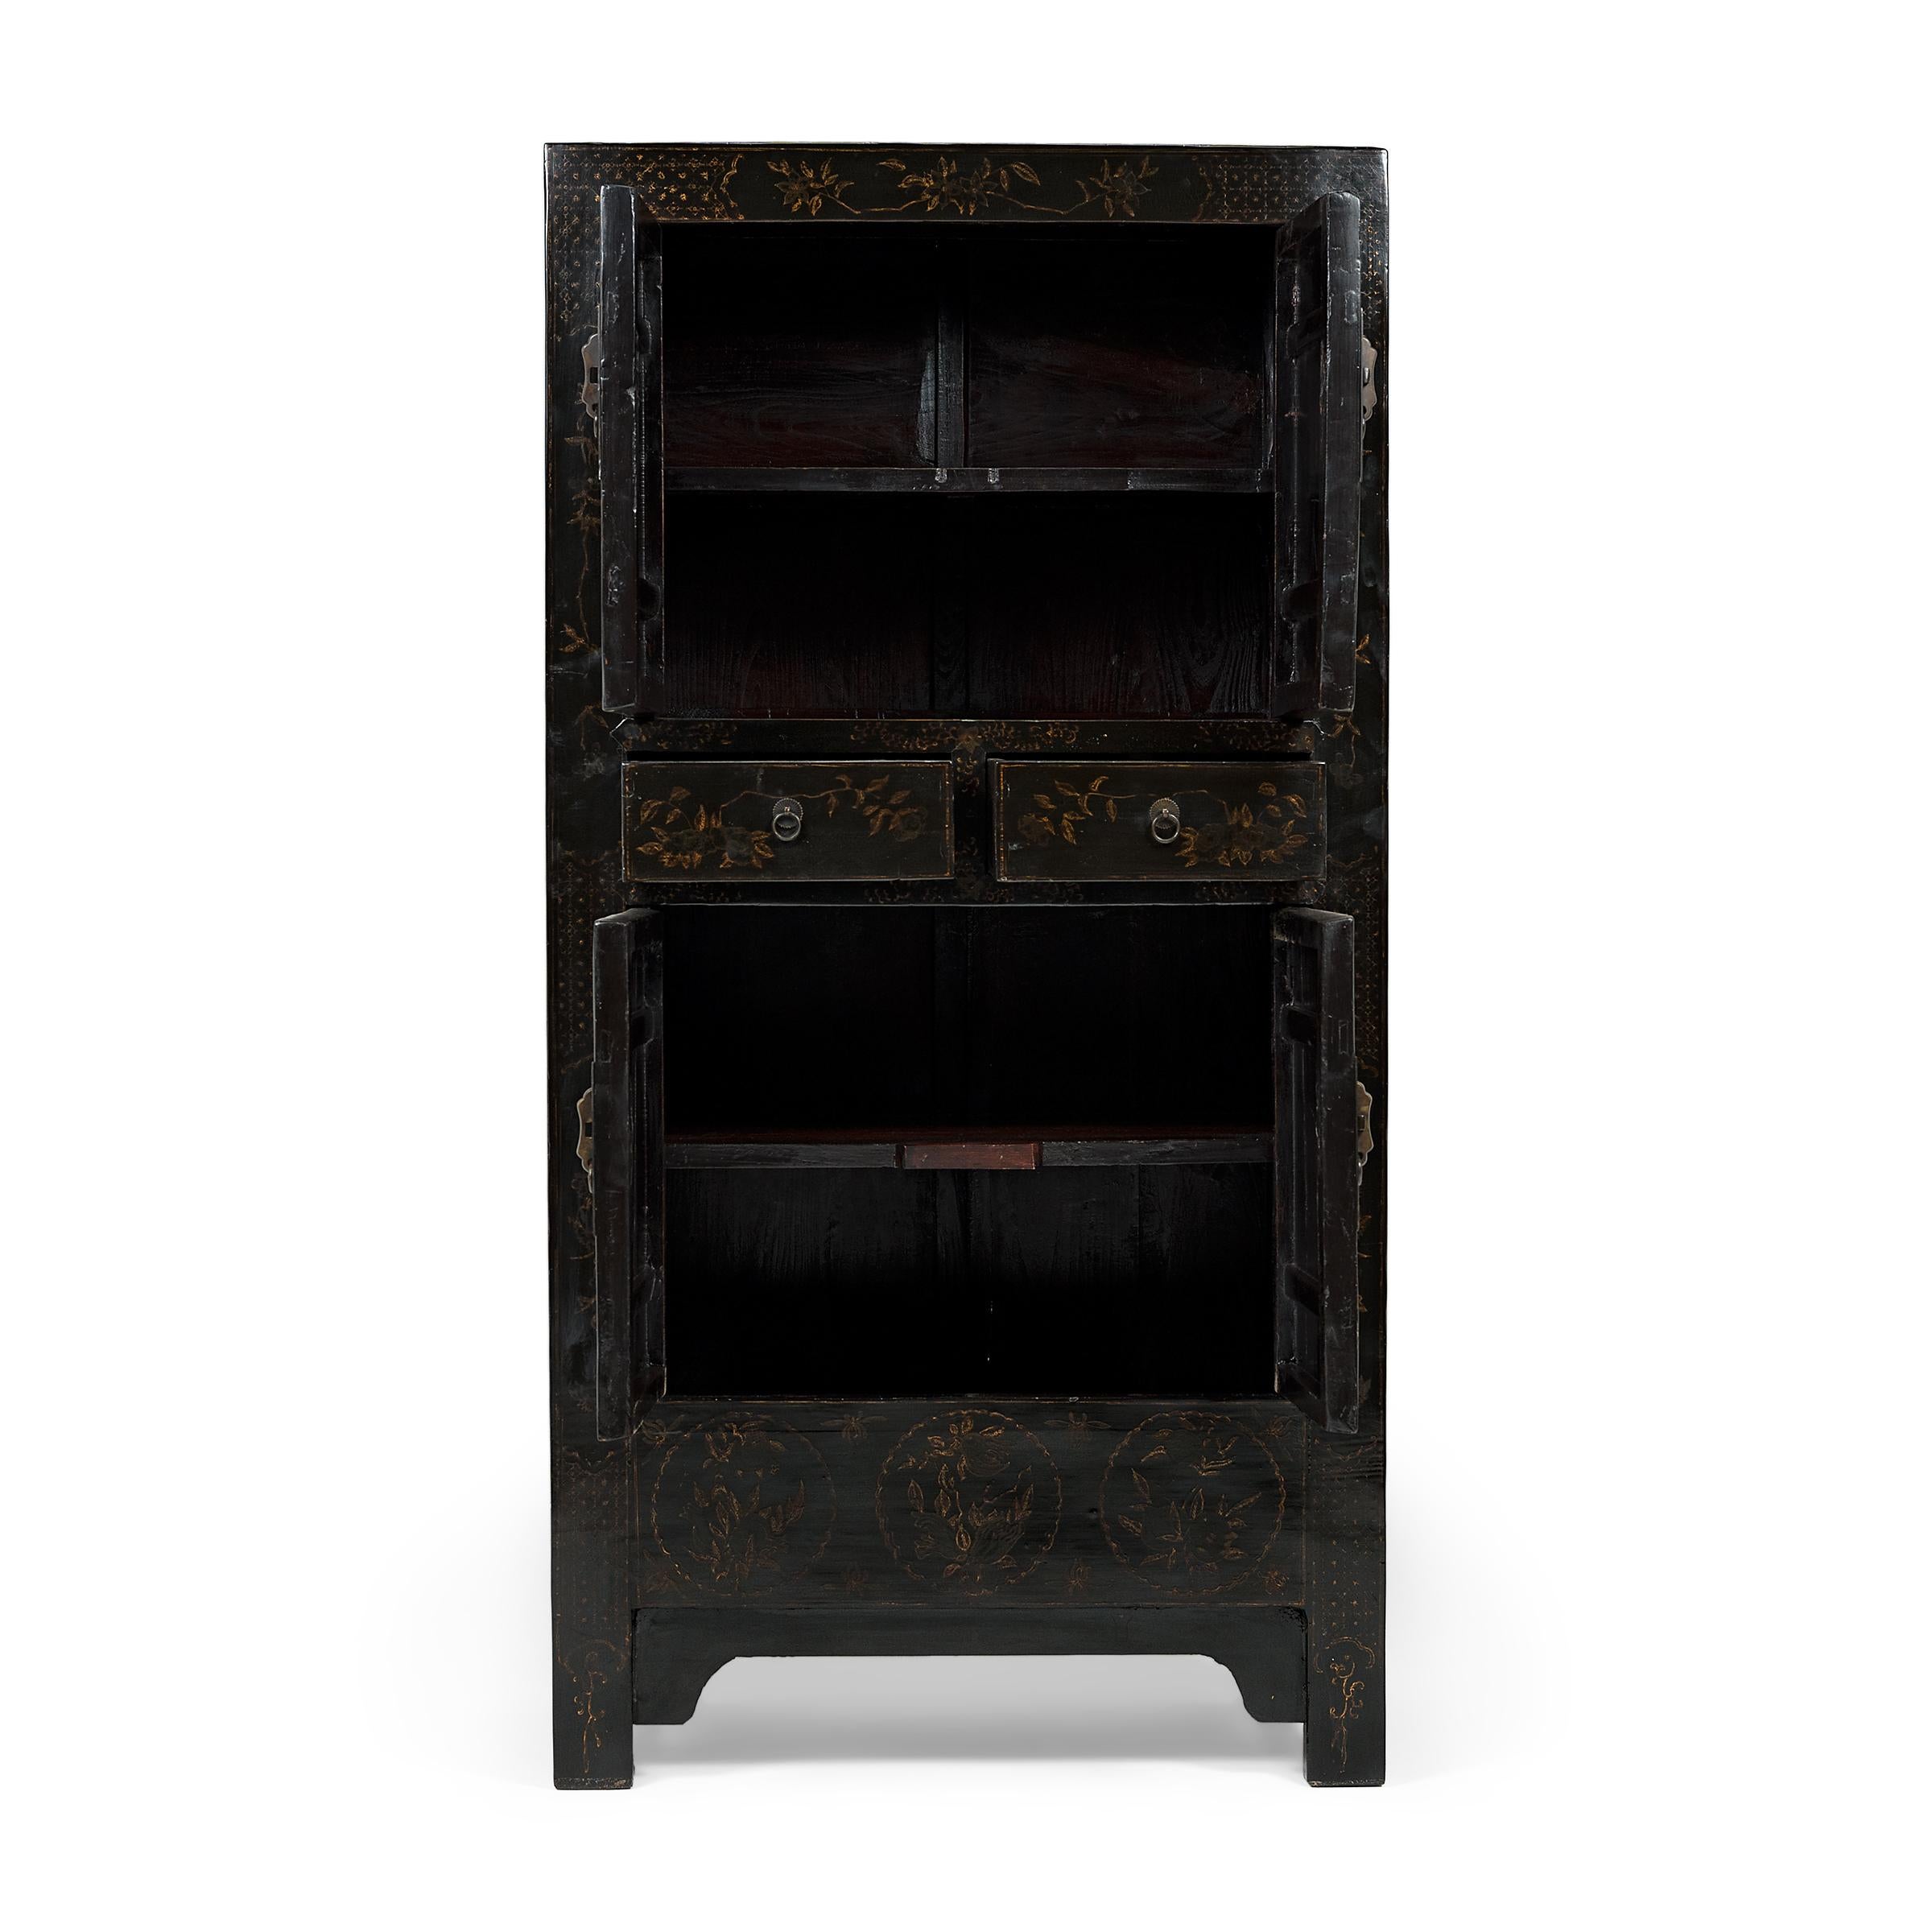 Chinese Gilt Black Lacquer Shanxi Cabinet, c. 1850 In Good Condition For Sale In Chicago, IL